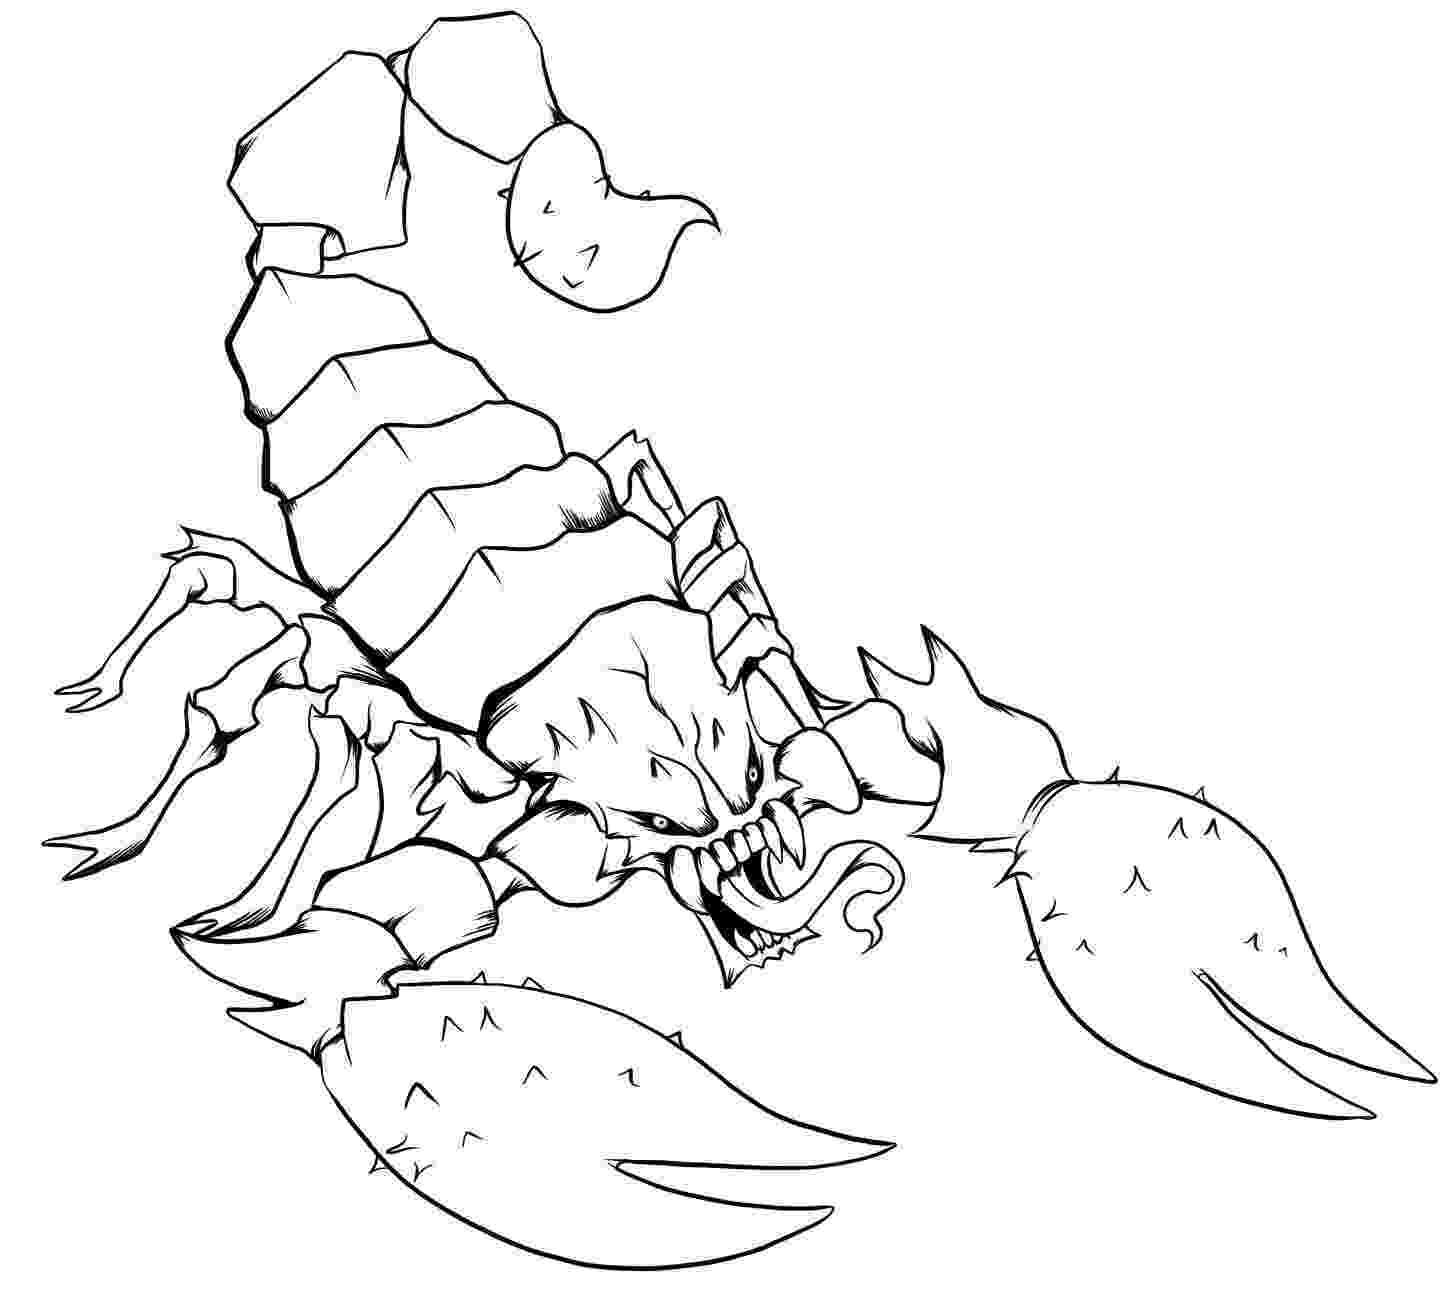 scorpion pictures to color scorpion coloring pages kidsuki color to scorpion pictures 